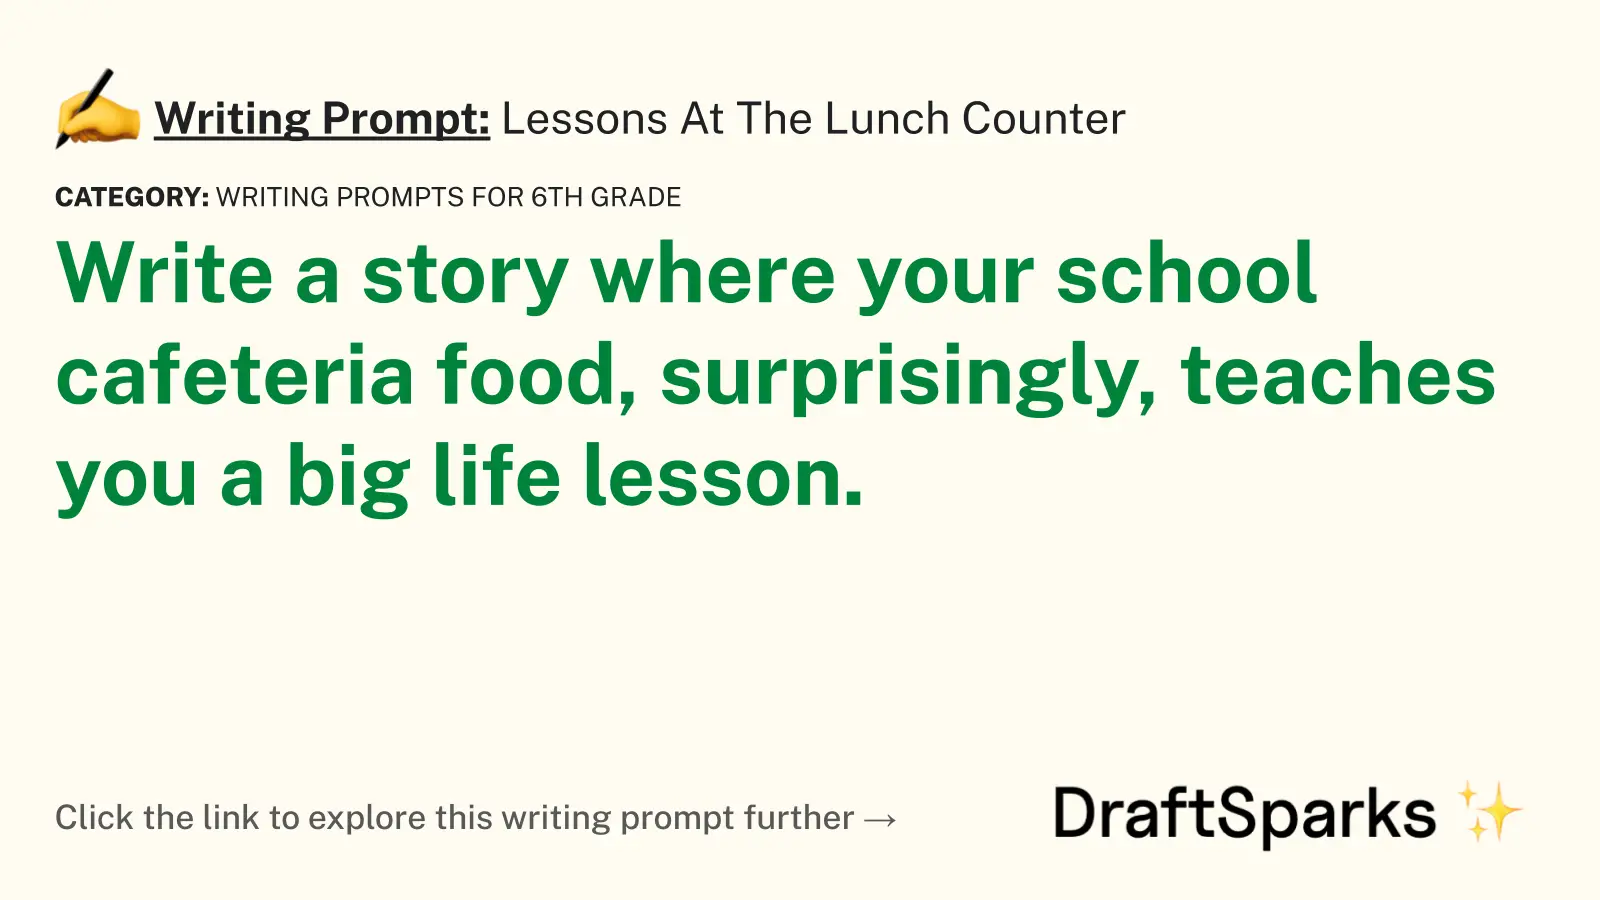 Lessons At The Lunch Counter